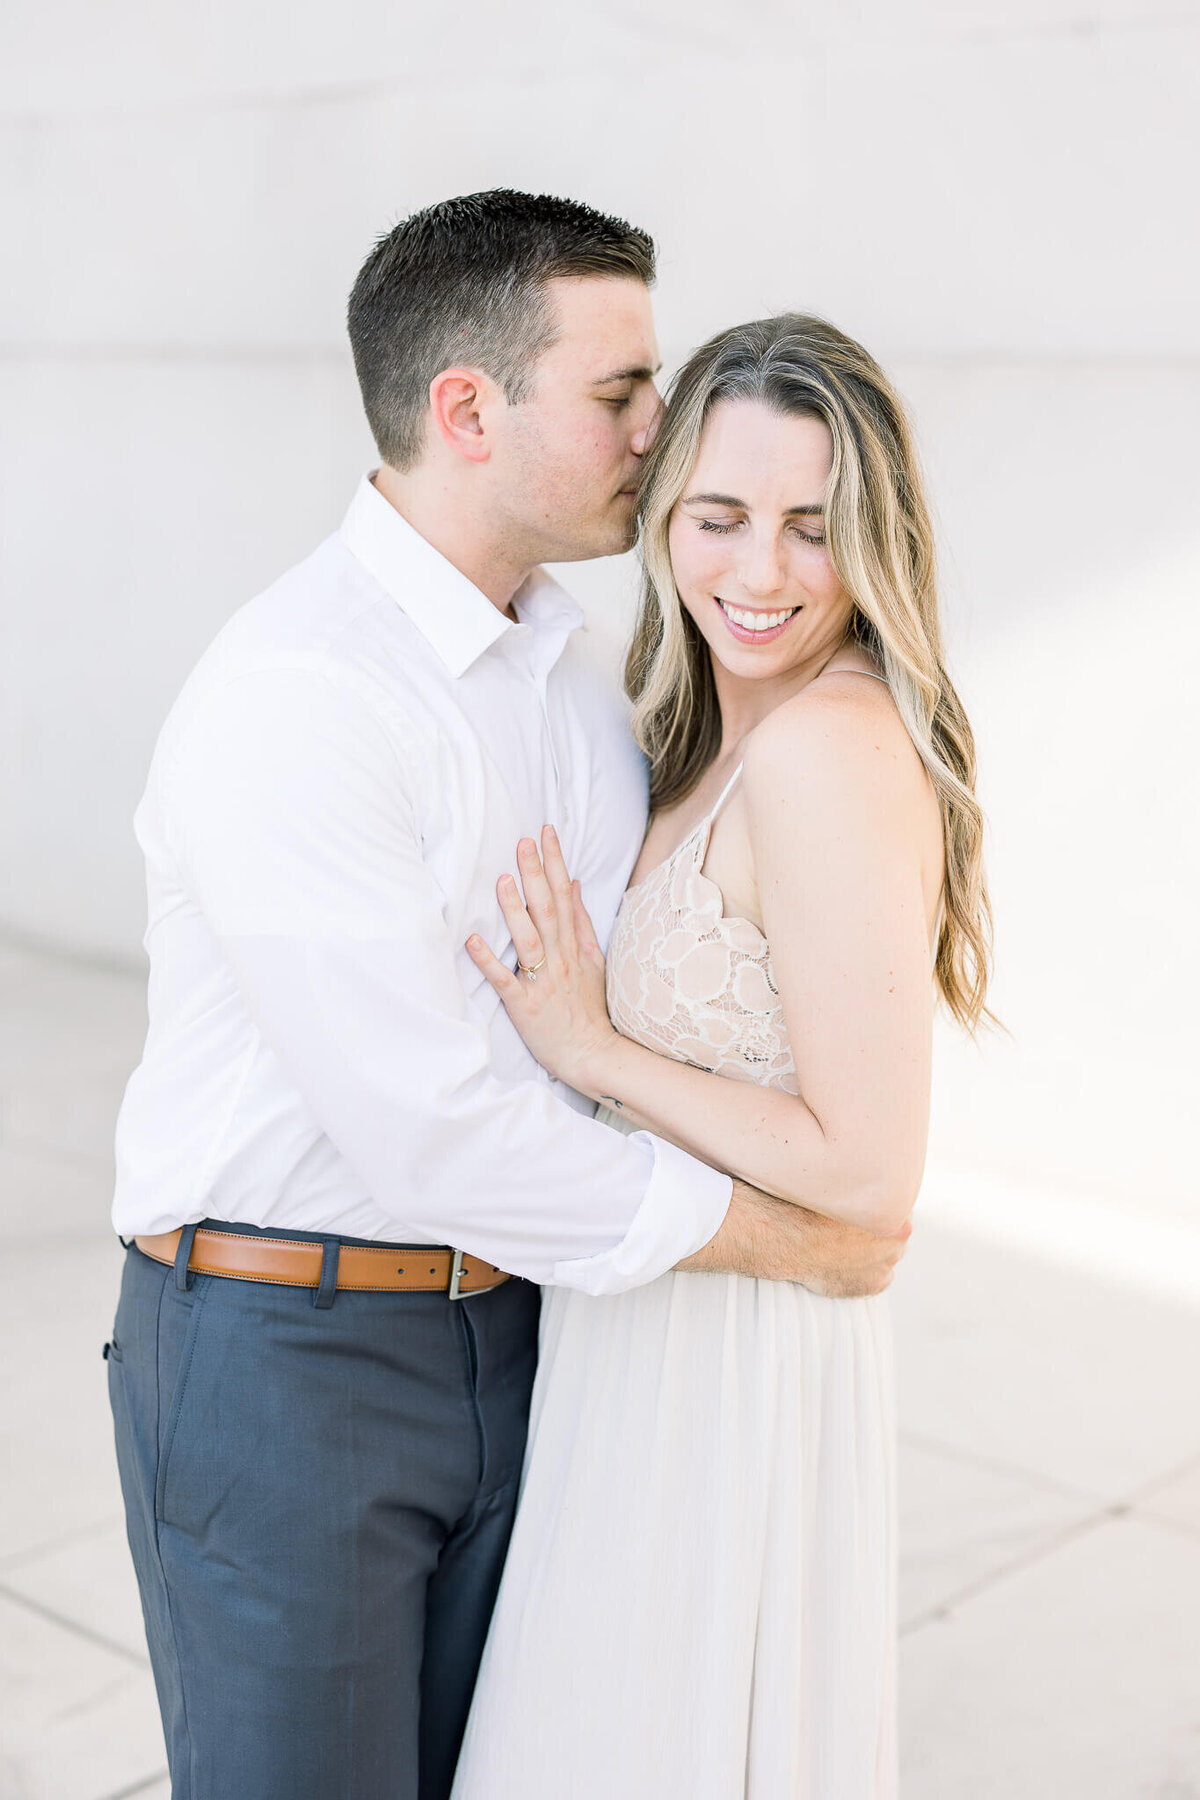 engagement-lincoln-memorial-proposal-photography-washington-DC-virginia-maryland-modern-light-and-airy-classic-timeless-romantic-23